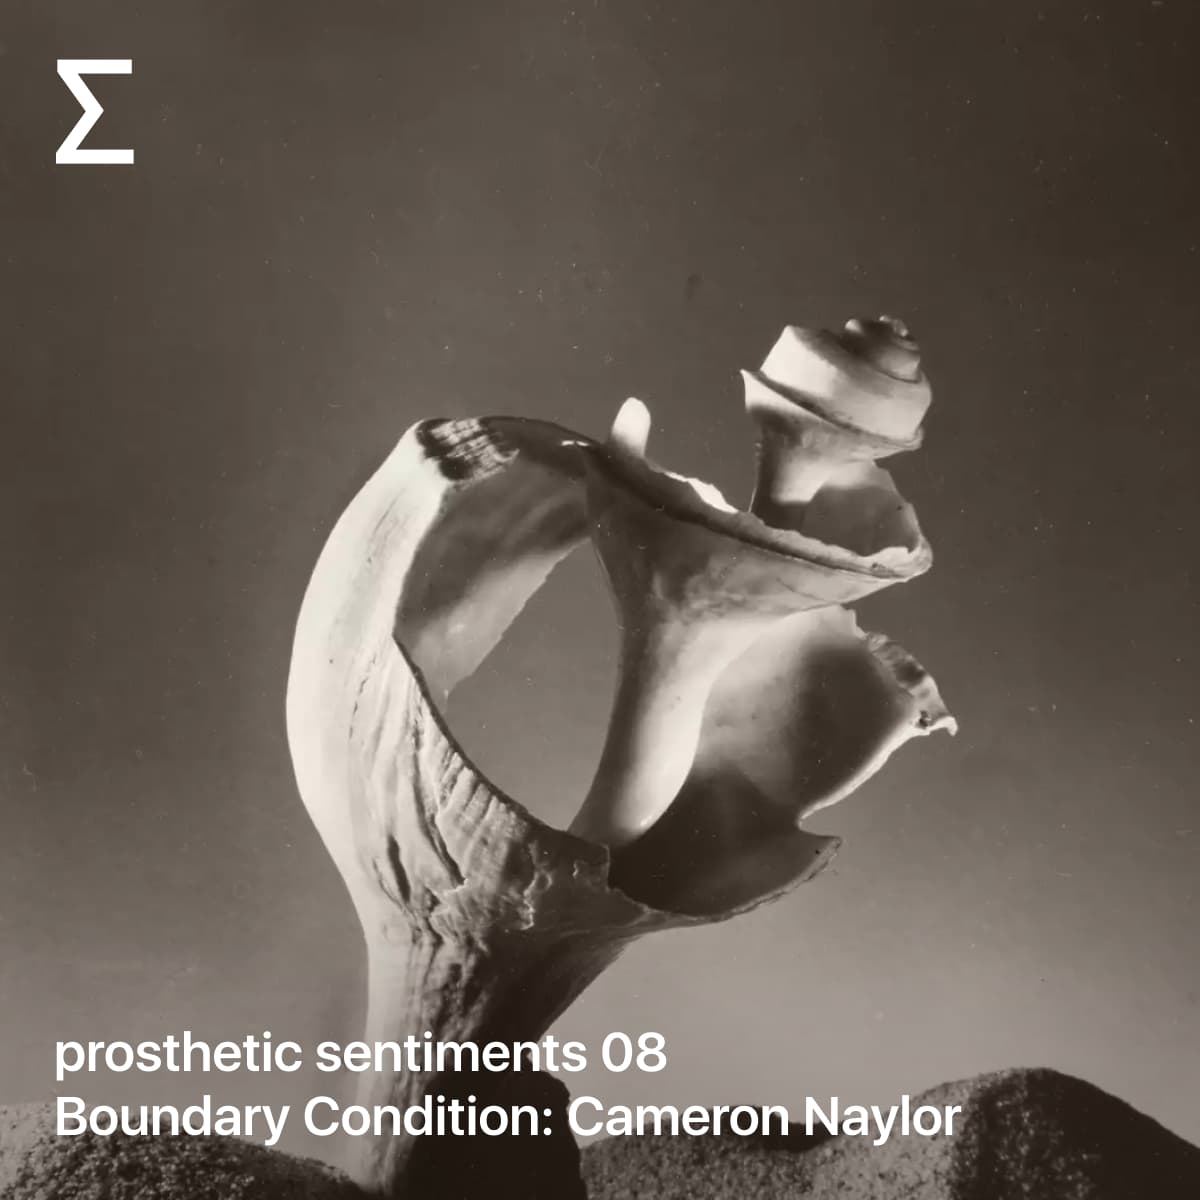 prosthetic sentiments 08 – Boundary Condition: Cameron Naylor